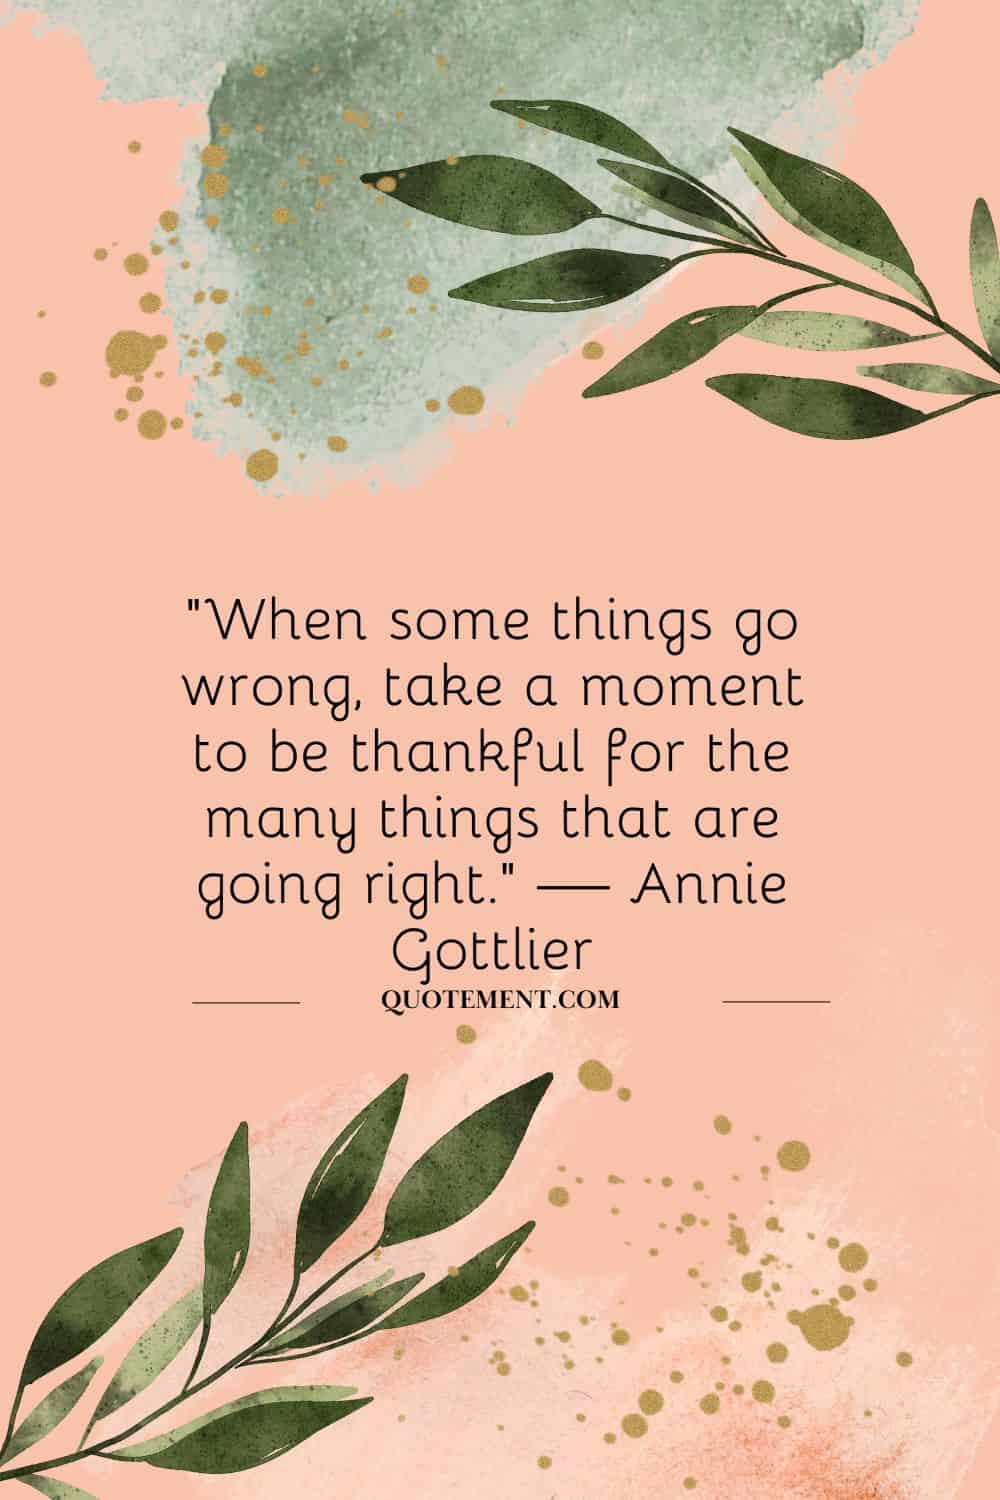 “When some things go wrong, take a moment to be thankful for the many things that are going right.” — Annie Gottlier